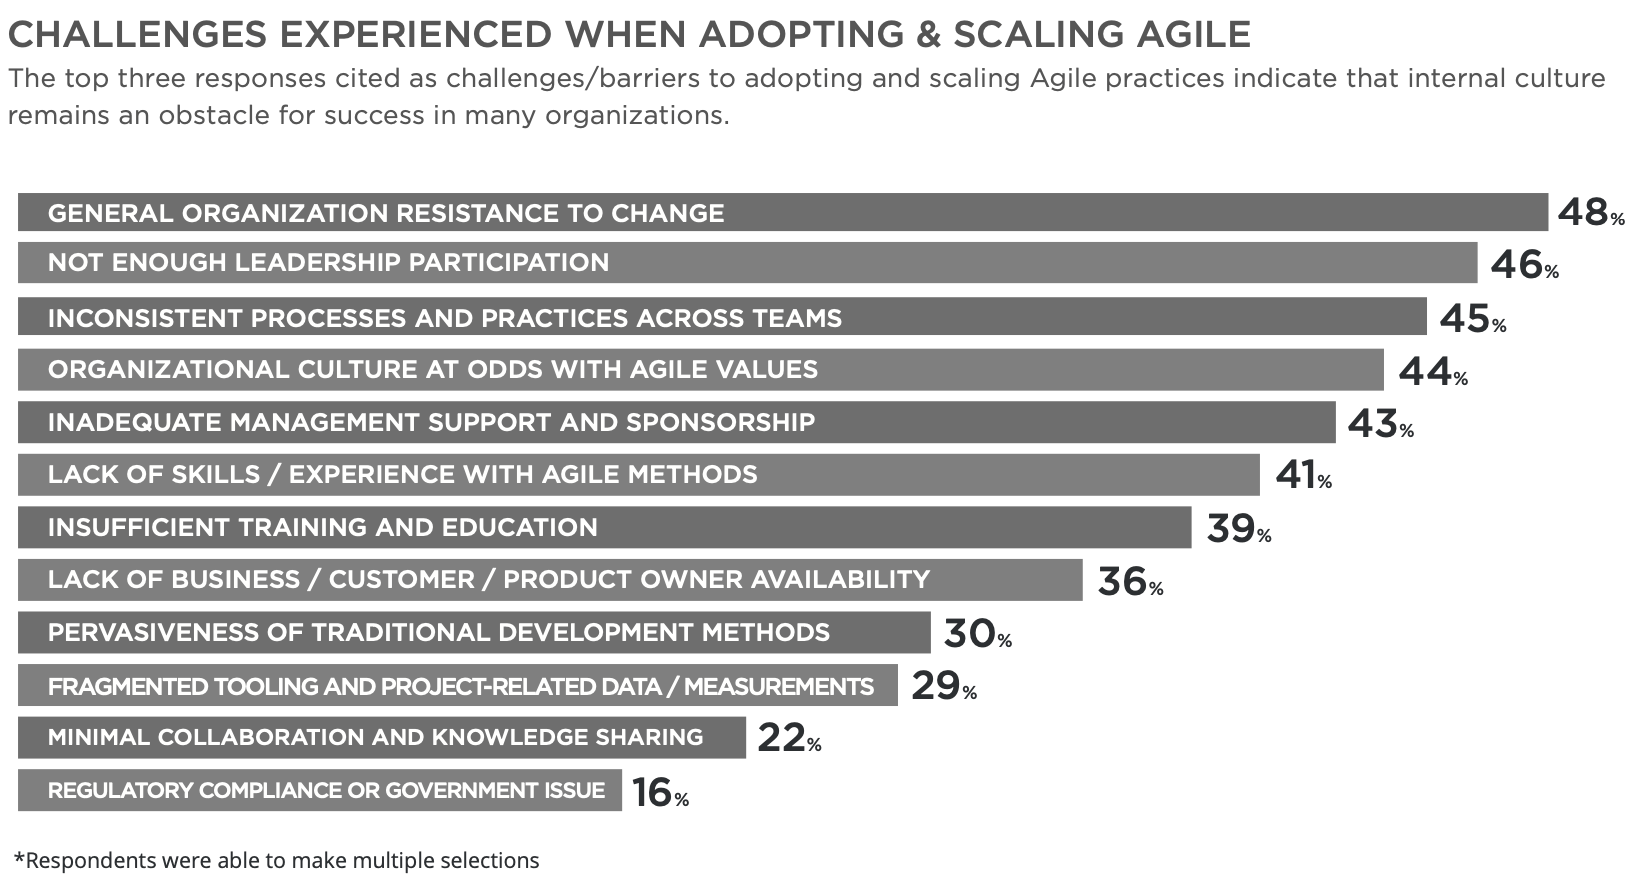 14th State of Agility Report: Challenges Experienced Adopting Agile